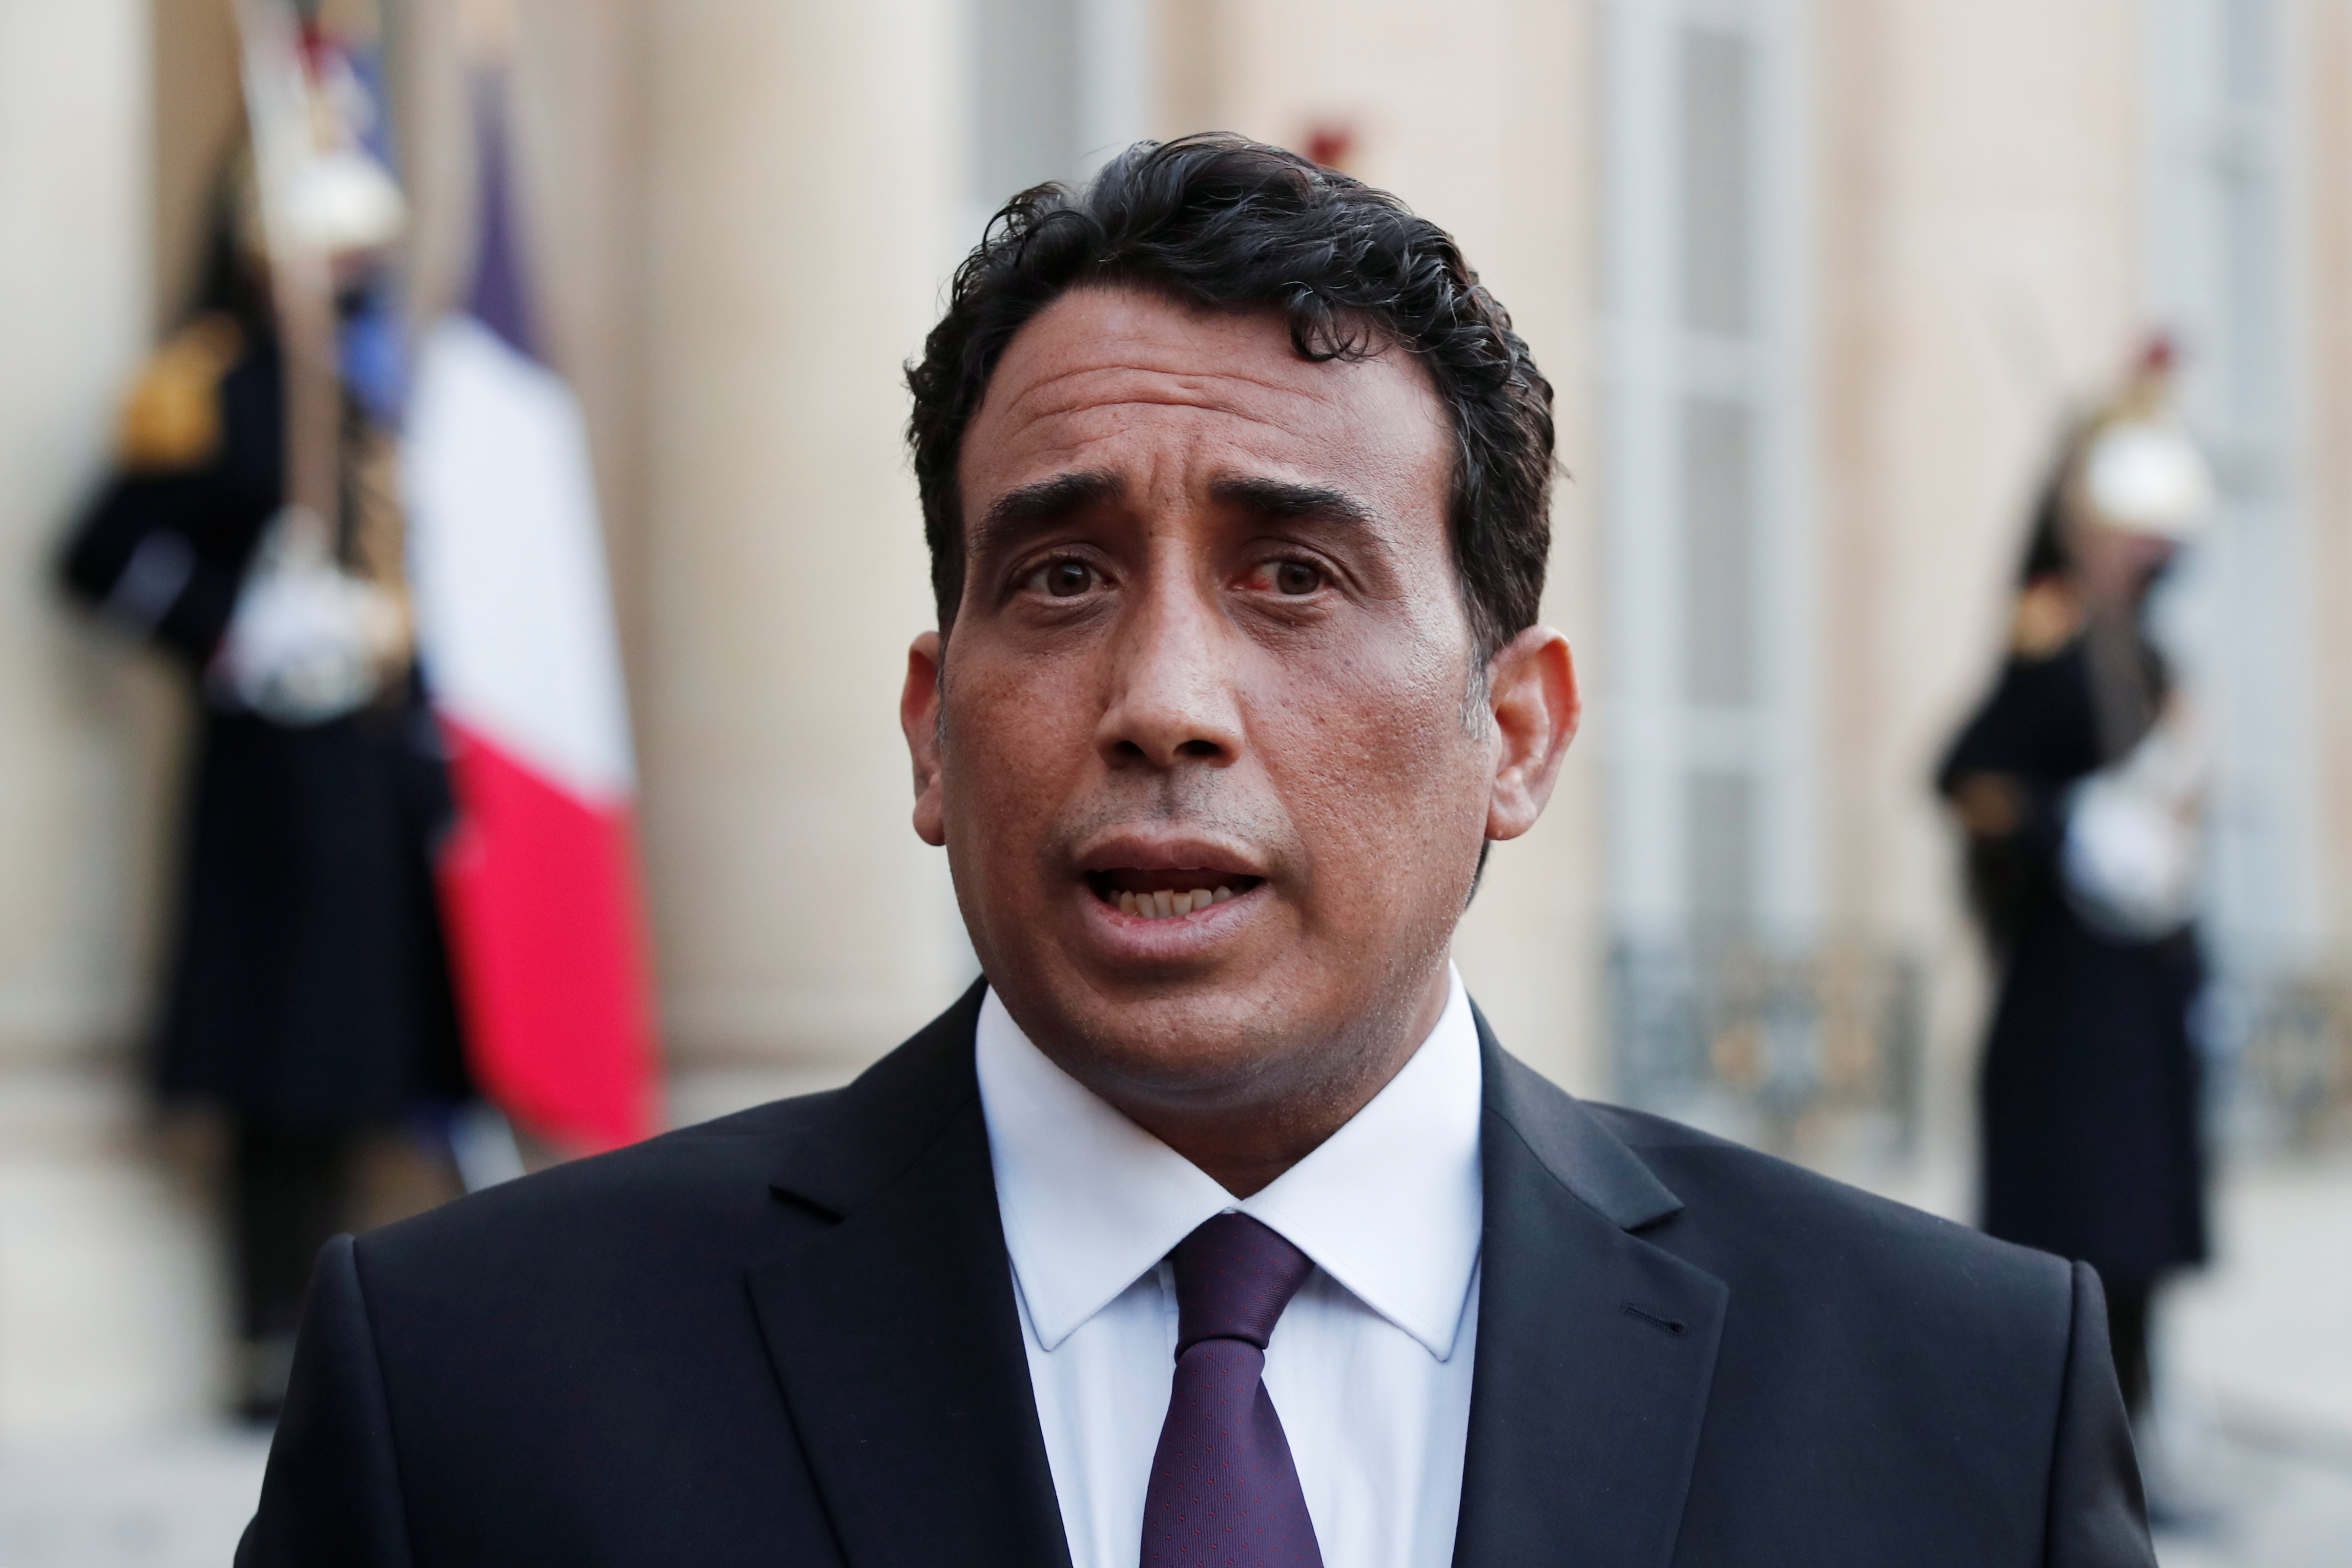 Mohamed al-Menfi, Head of the Presidential Council of Libya, talks to the press after a meeting with the French President at the Elysee Palace in Paris